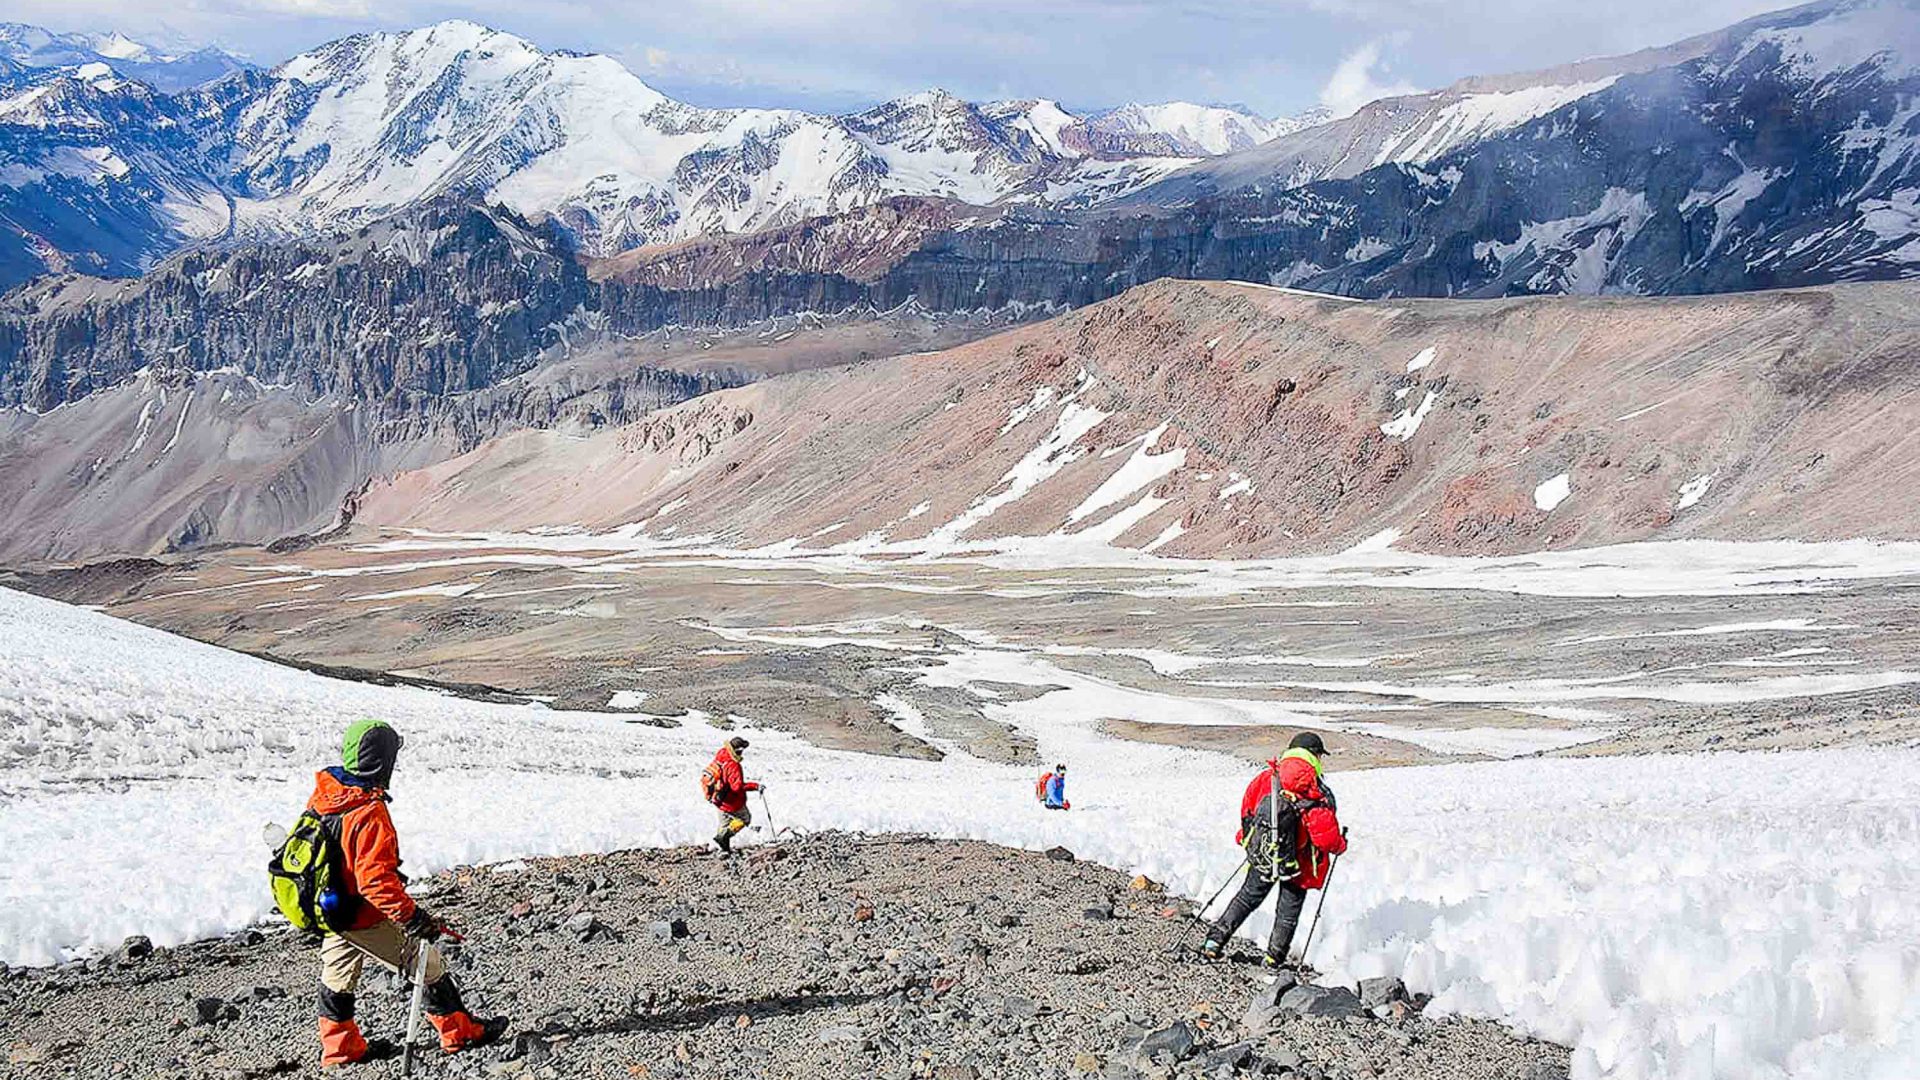 Three hikers in orange stand and look at a glacier.